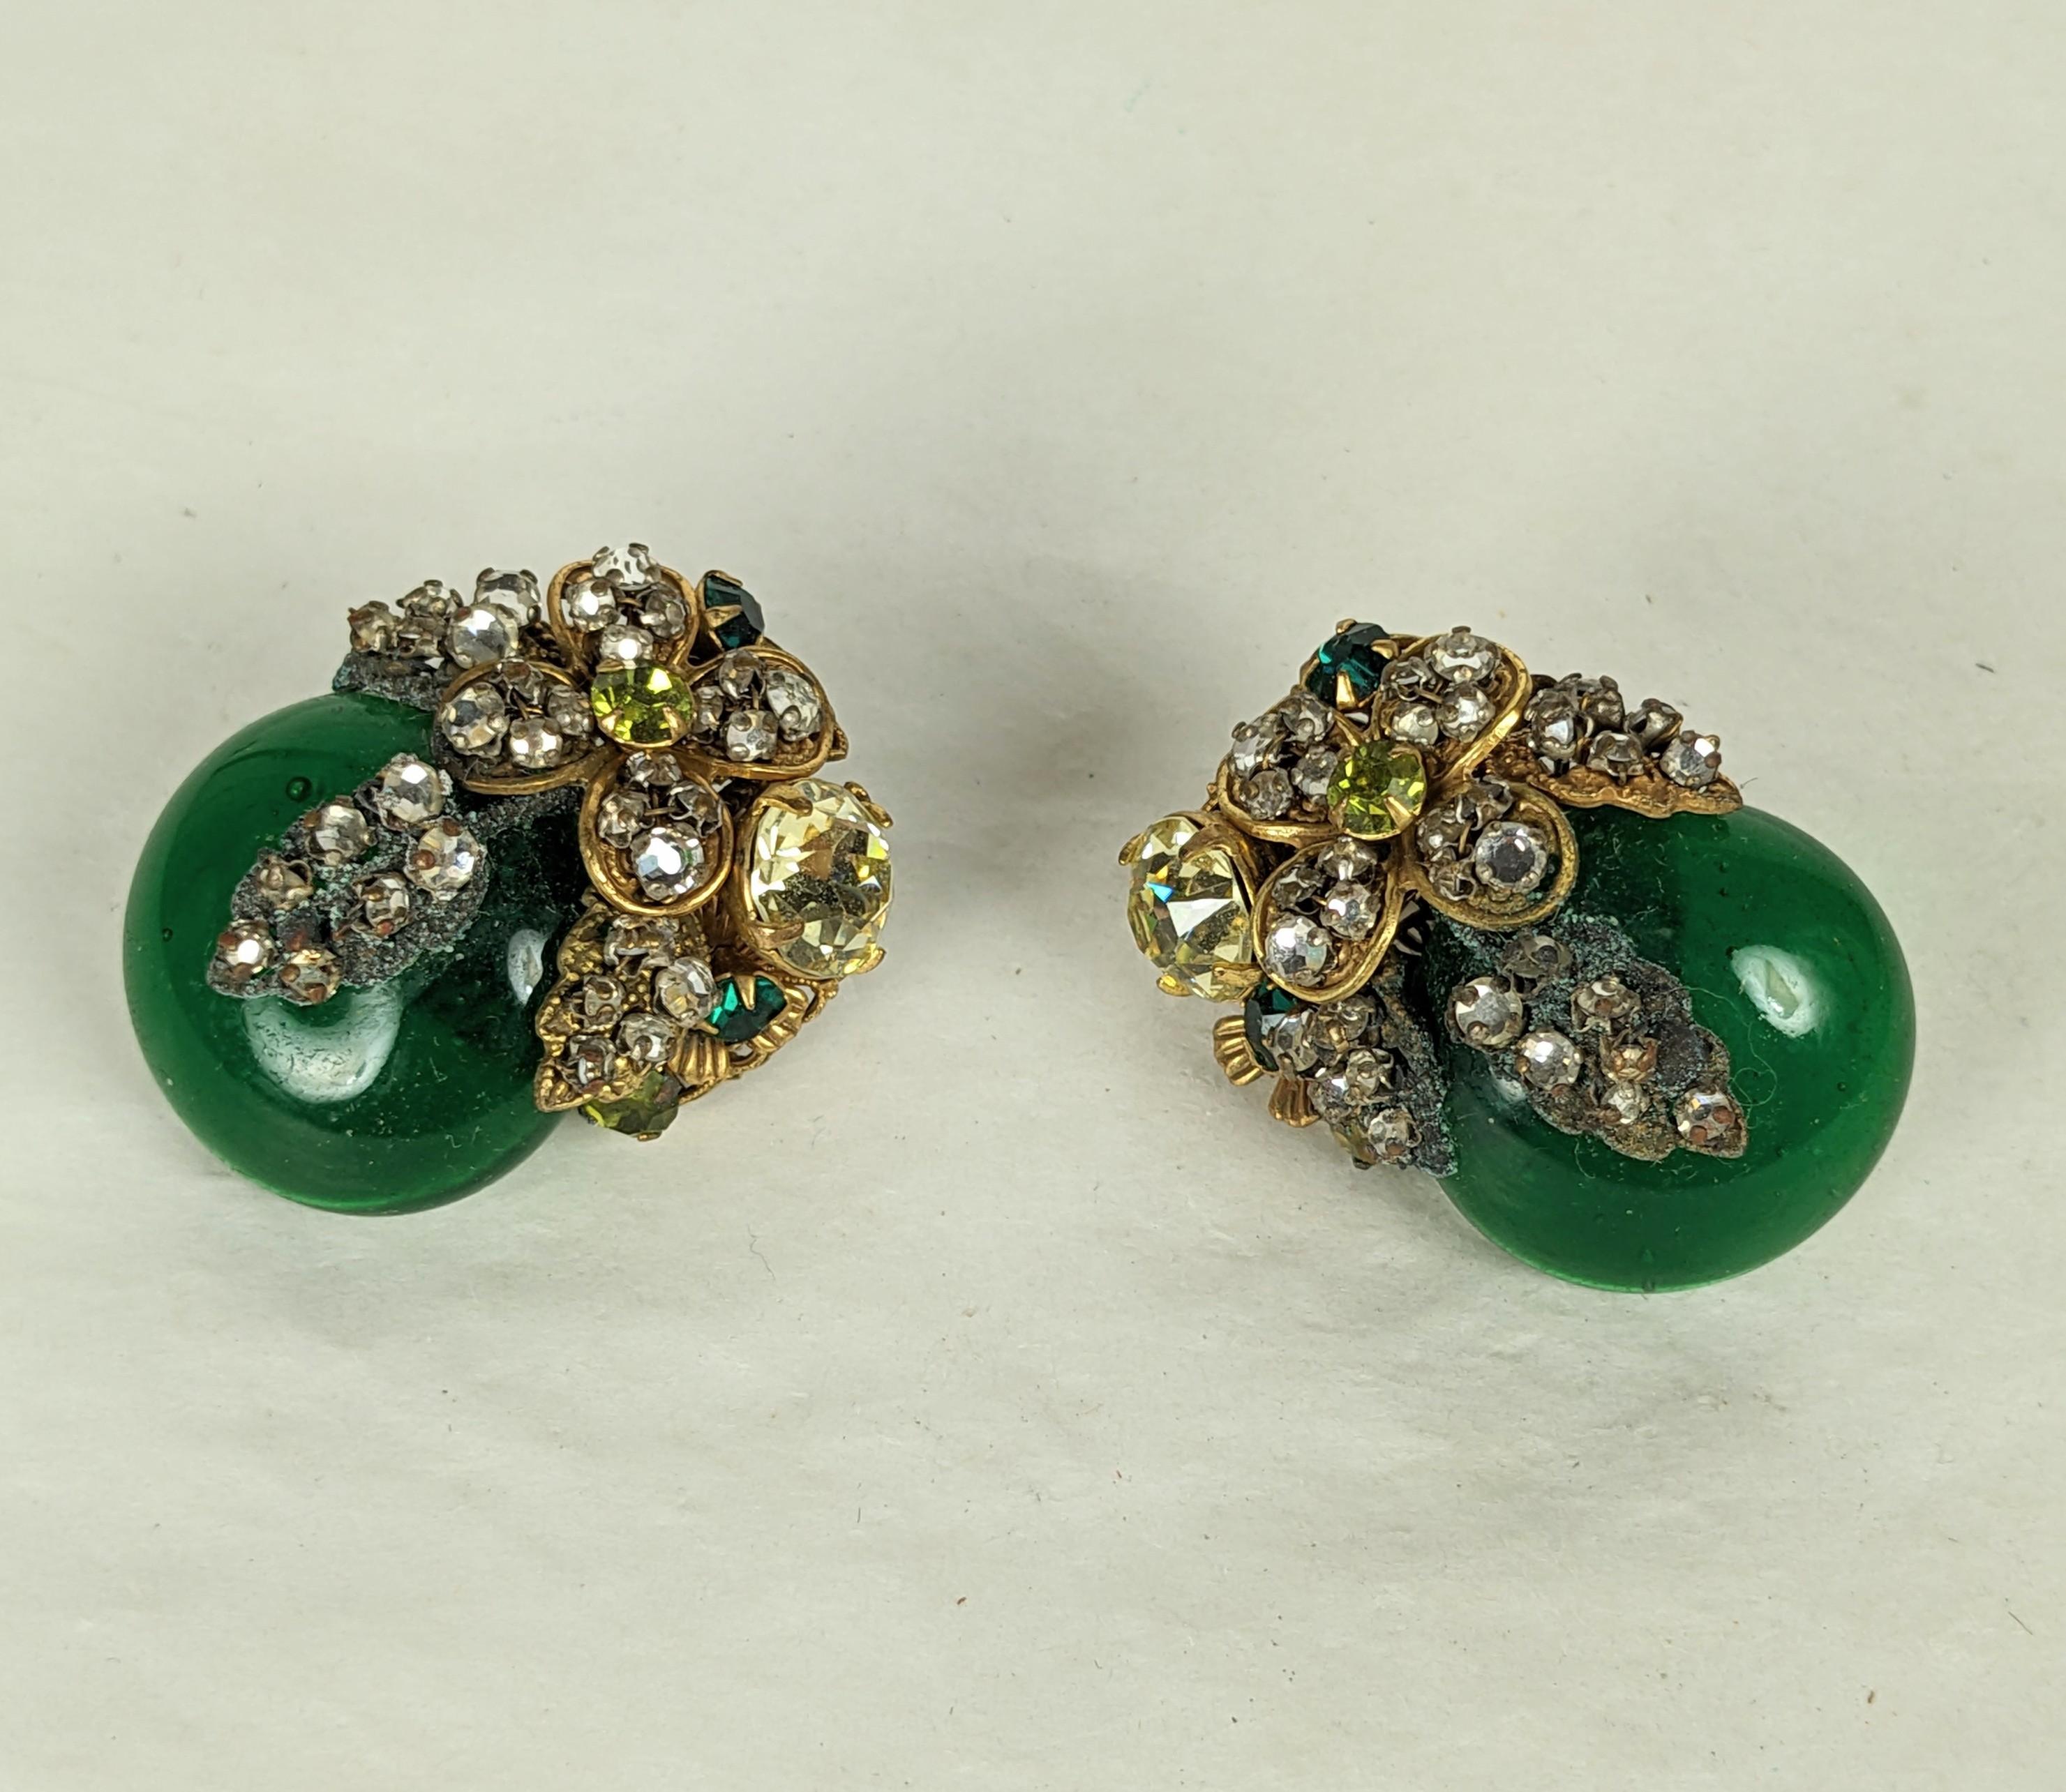 Retro Miriam Haskell Ornate Emerald Gripoix Glass Earrings For Sale